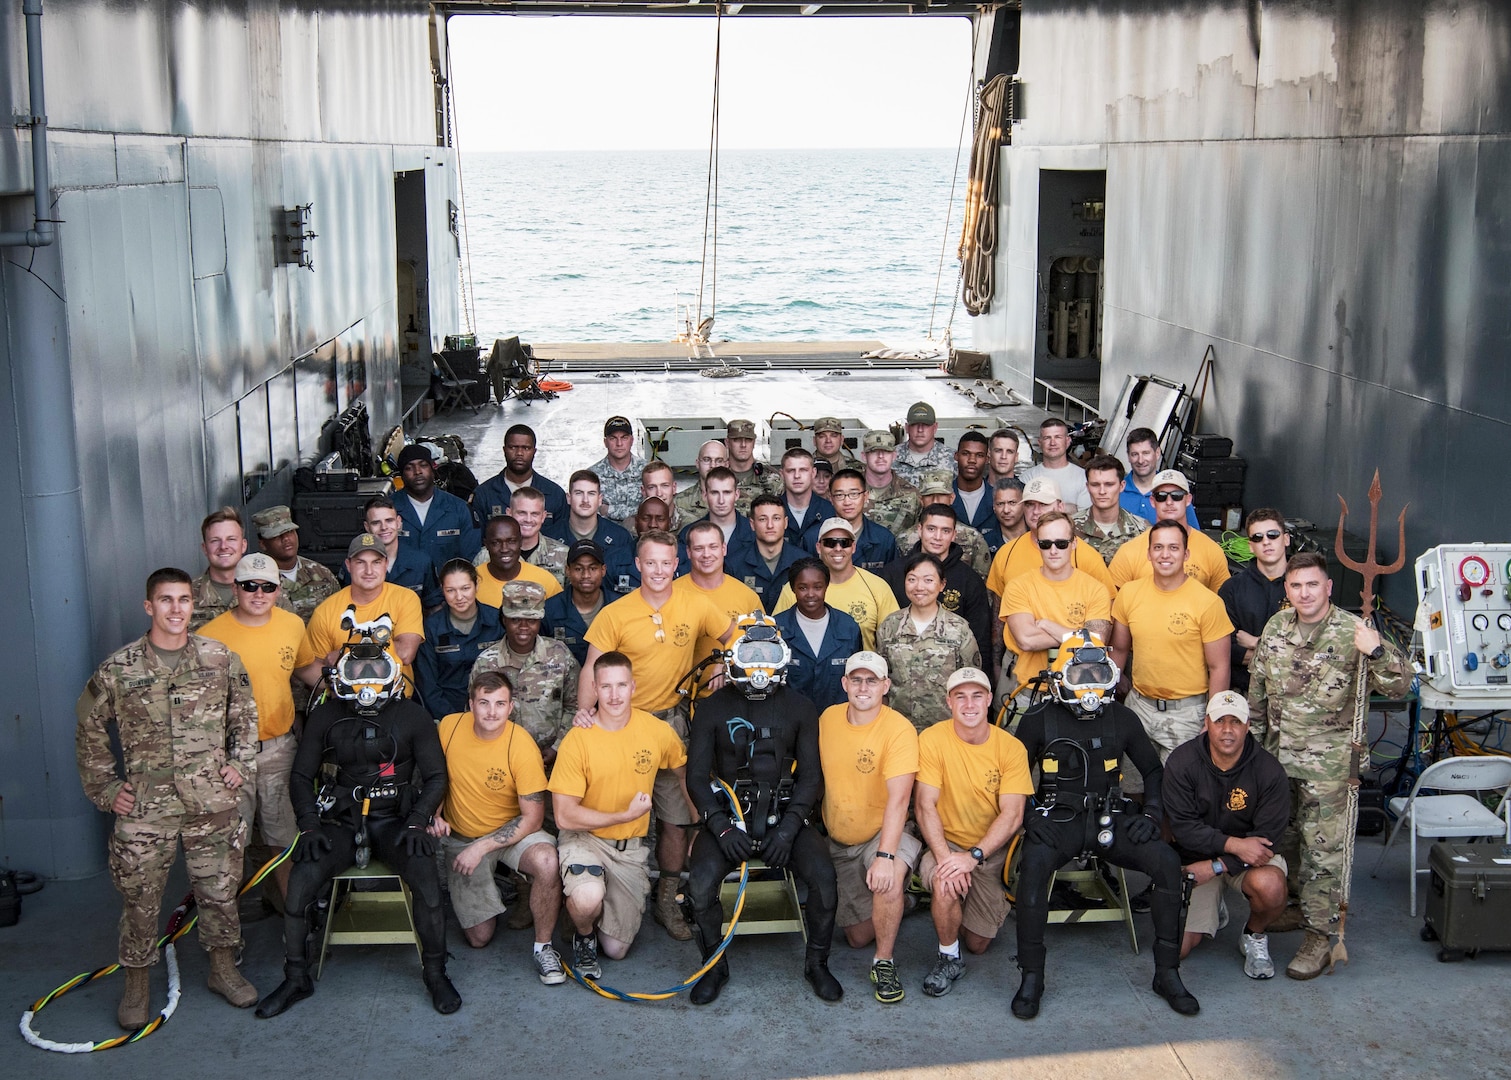 The 511th Engineer Dive Detachment from Fort Eustis, Va., and the entire crew of the MG Charles P. Gross (Logistics Support Vessel-5), pose for a group photo while anchored on the Arabian Gulf, off the coast of Kuwait Naval Base, Nov. 18, 2016. Soldiers from the dive unit utilized the vessel to conduct a two-week diving exercise, Operation Deep Blue, enhancing the team’s overall readiness and ability to support U.S. Army Central missions. (U.S. Army photo by Sgt. Angela Lorden)